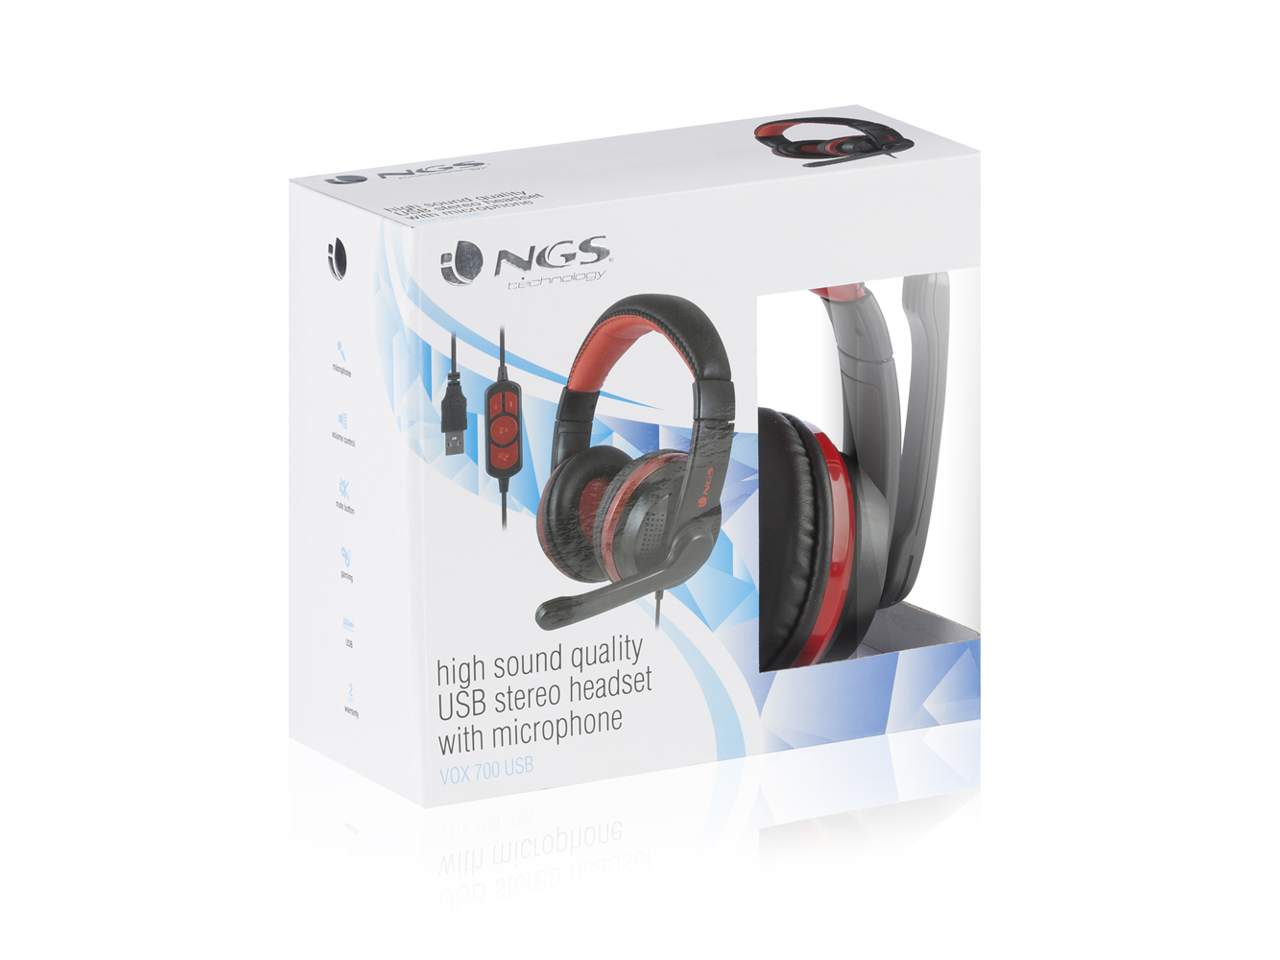 NGS USB Stereo Headphones with Microphone Color Black/Red Model VOX700USB